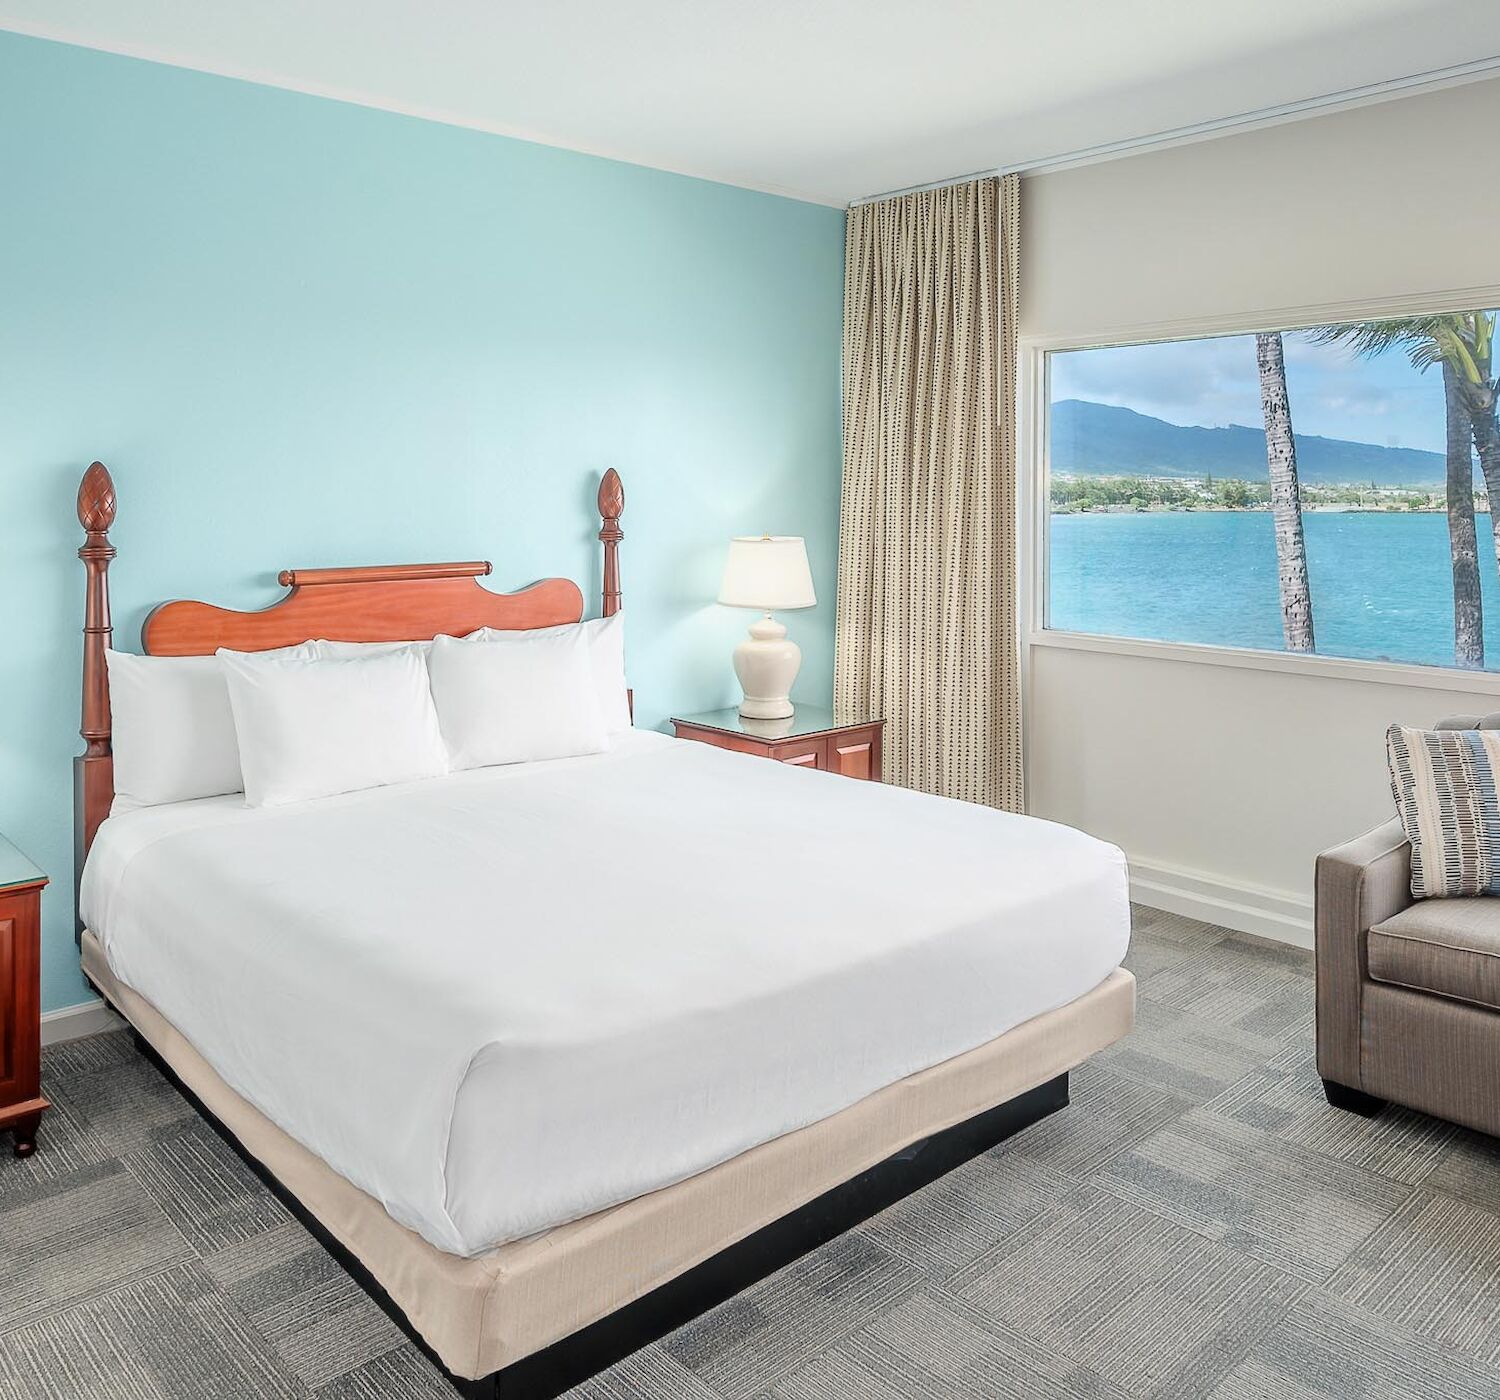 A bright, airy hotel room with a large bed, two nightstands with lamps, a sofa, and a window showcasing an ocean view with palm trees and mountains.